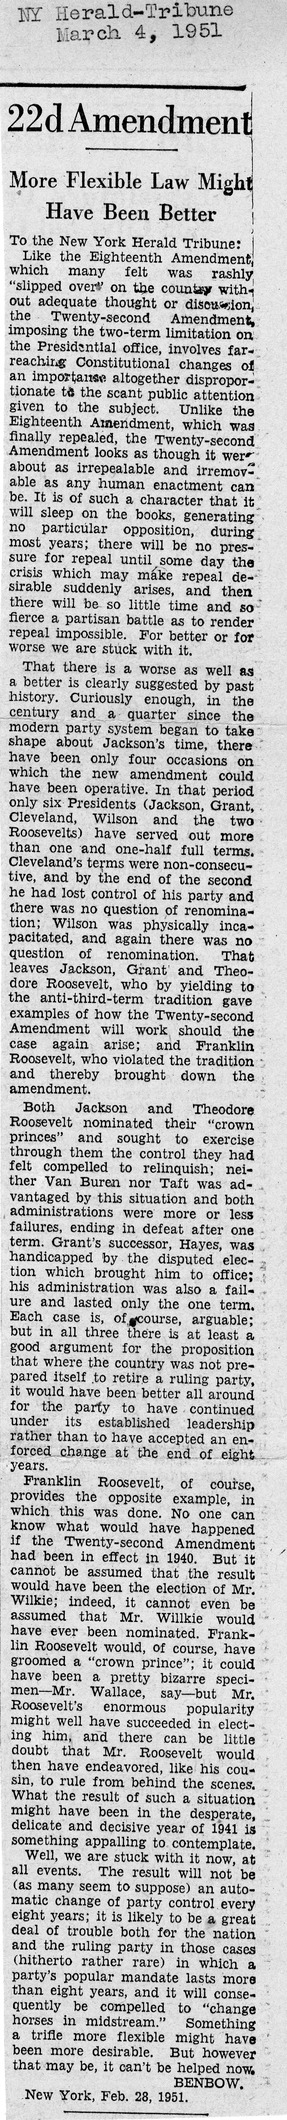 Newspaper Article from the New York Herald-Tribune, 22nd Amendment